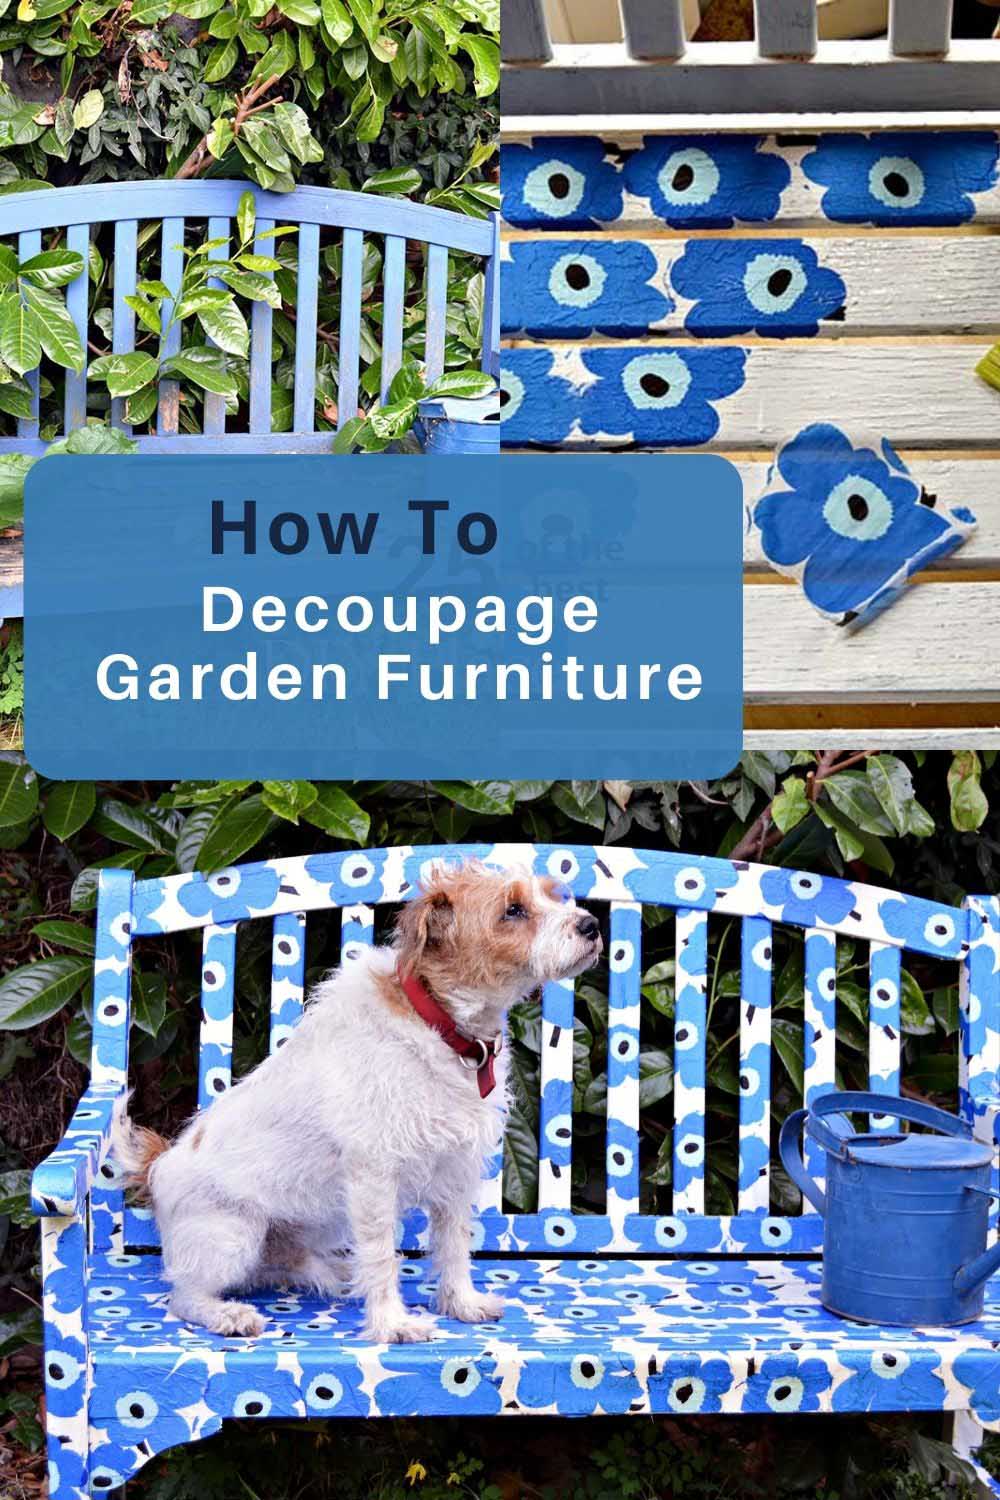 Instead of upcycling an old garden bench with paint how about transforming it with paper napkin decoupage to create a unique Marimekko bench. It can be made waterproof to stay outside all year round.